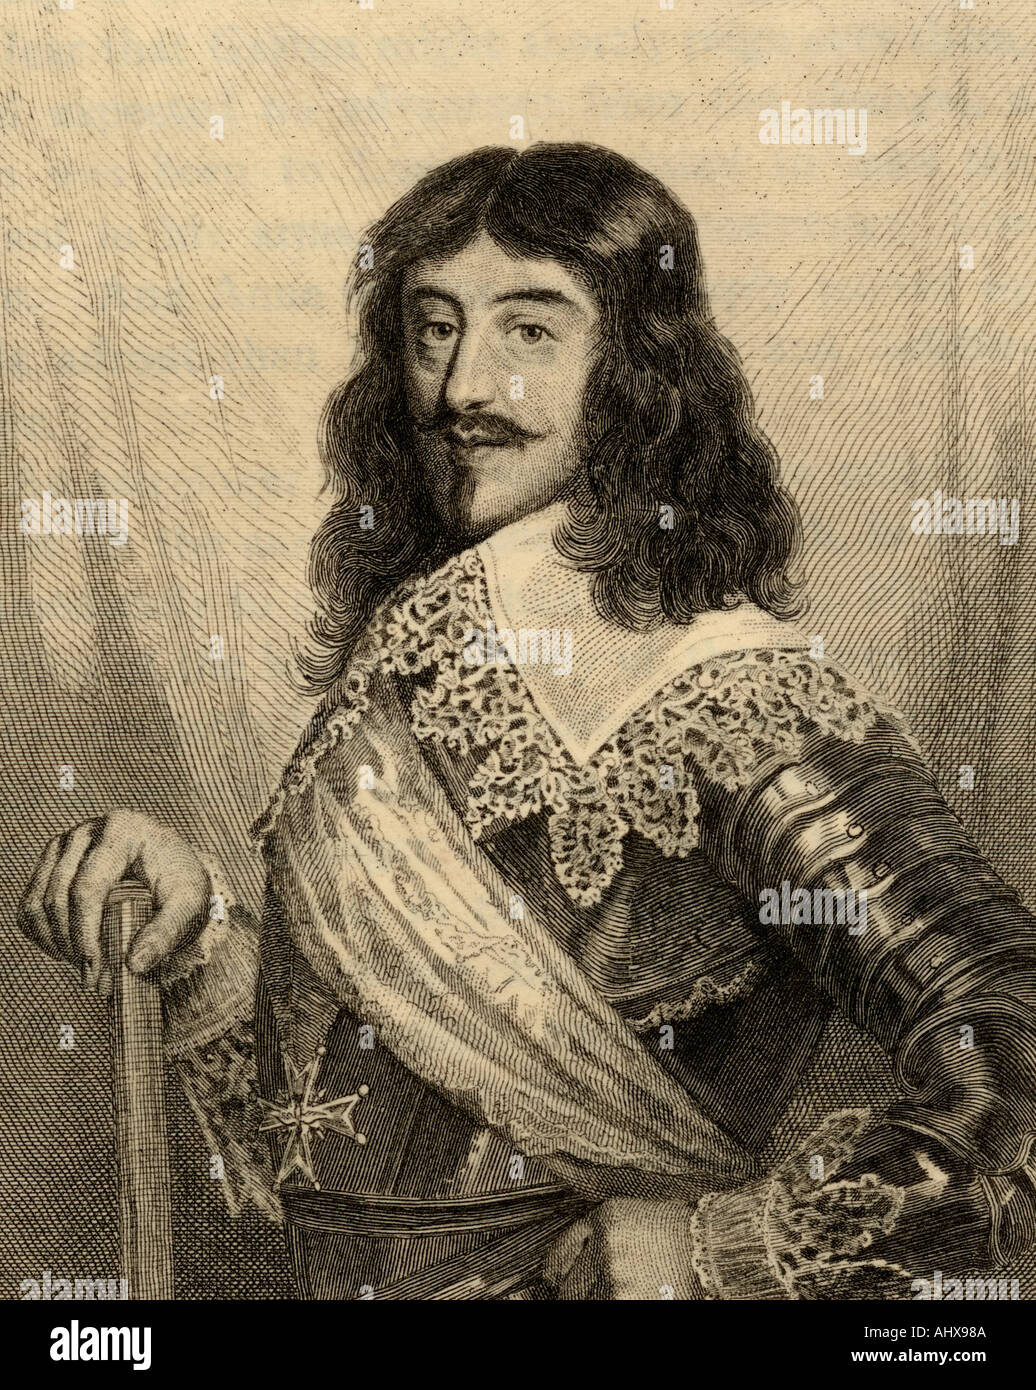 Bourbon Dynasty: Louis XIII, the Not-Quite-There ( 1601-1643